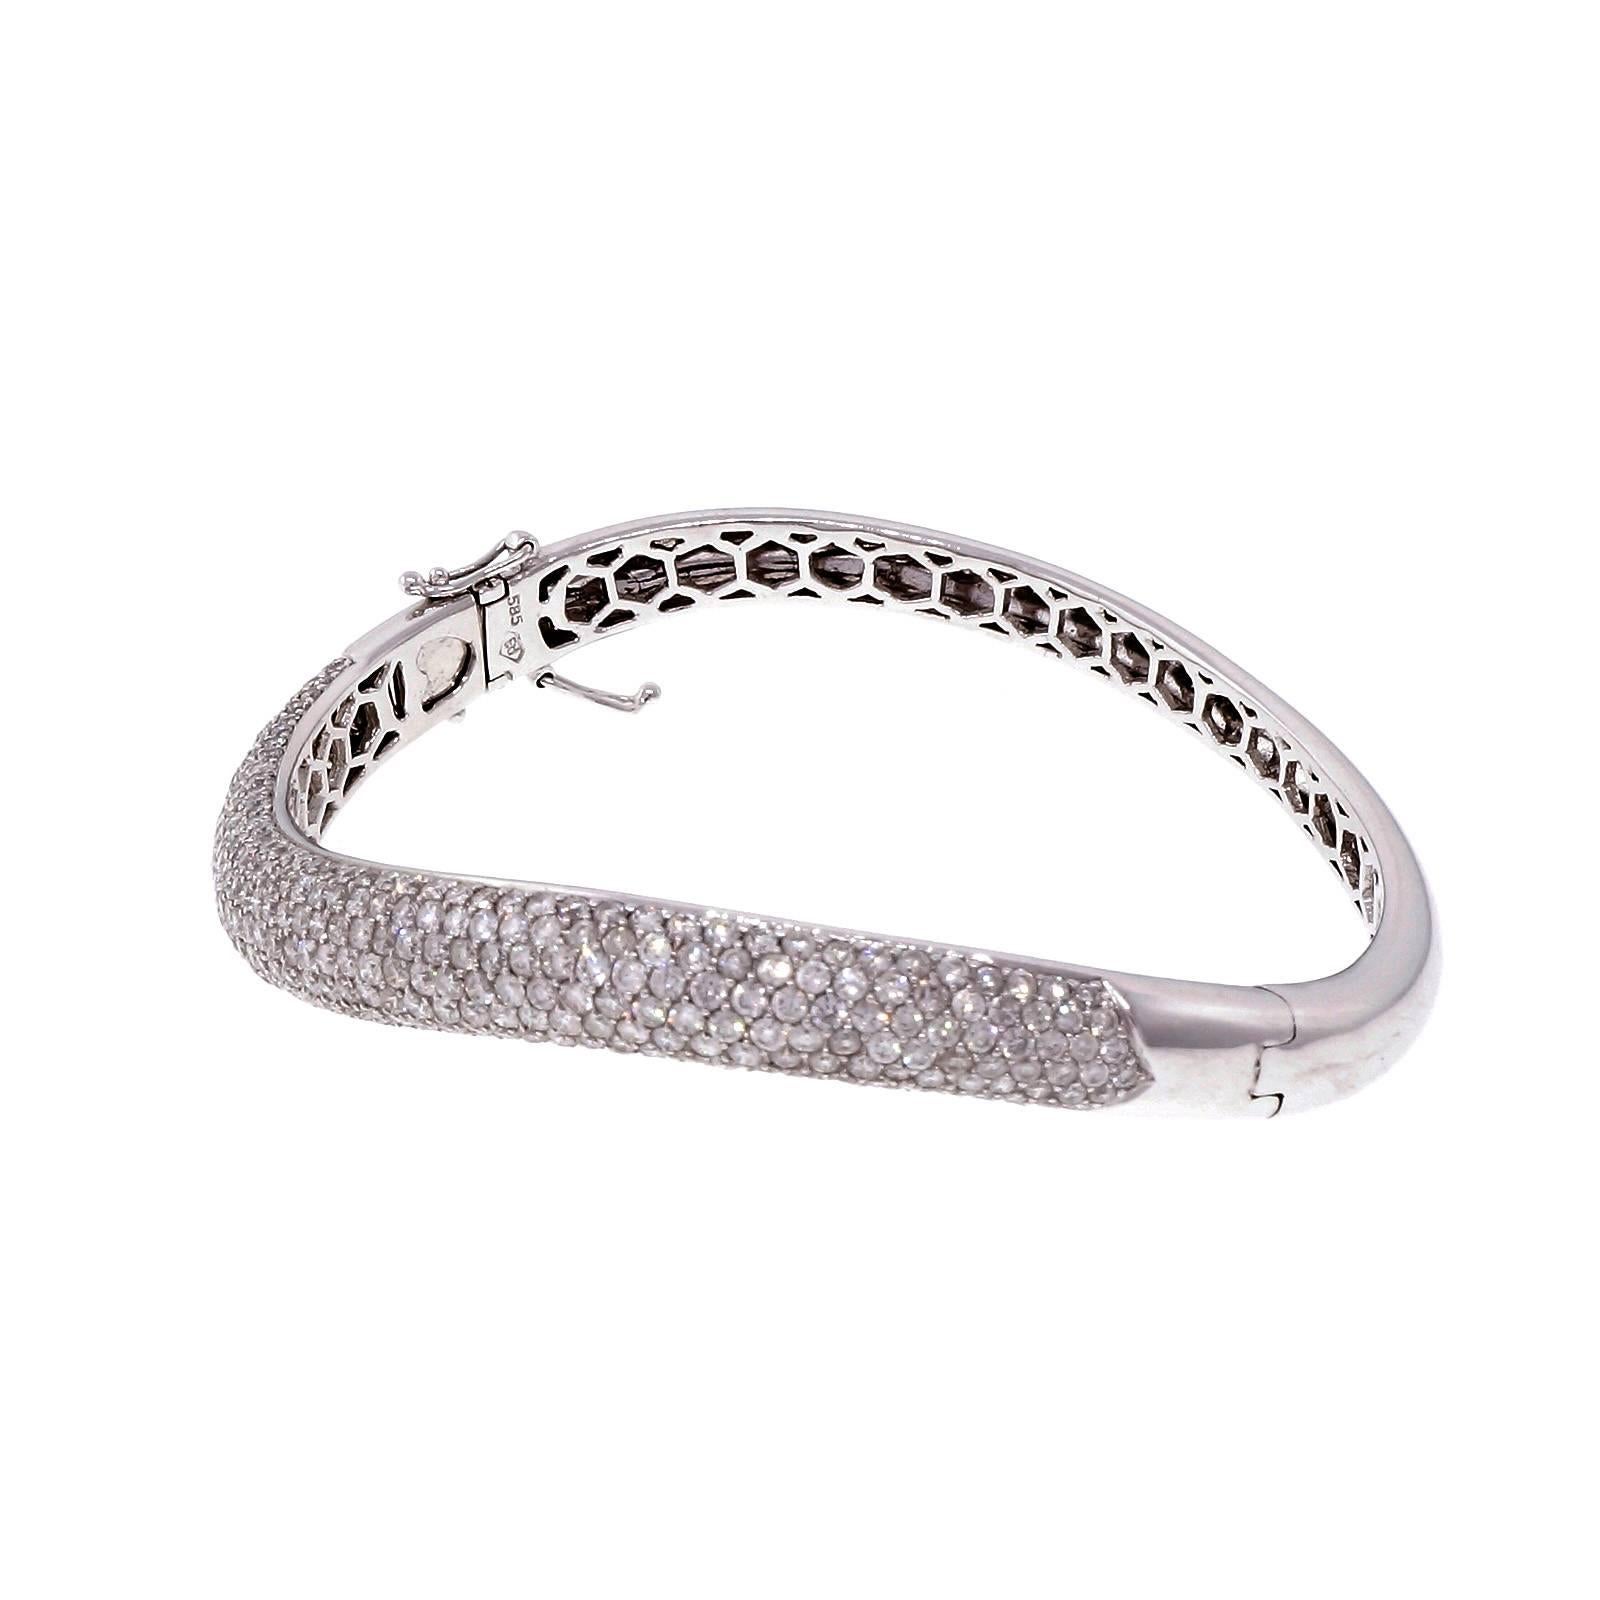 Curved swirl design domed diamond Pavé hinged bangle bracelet stamped Ed. Secure catch and 2 figure 8 safety catches.

322 round diamonds, approx. total weight 6.02cts, G, VS – SI
14k white gold
Tested: 14k
Stamped: 585
Hallmark: Ed
19.6